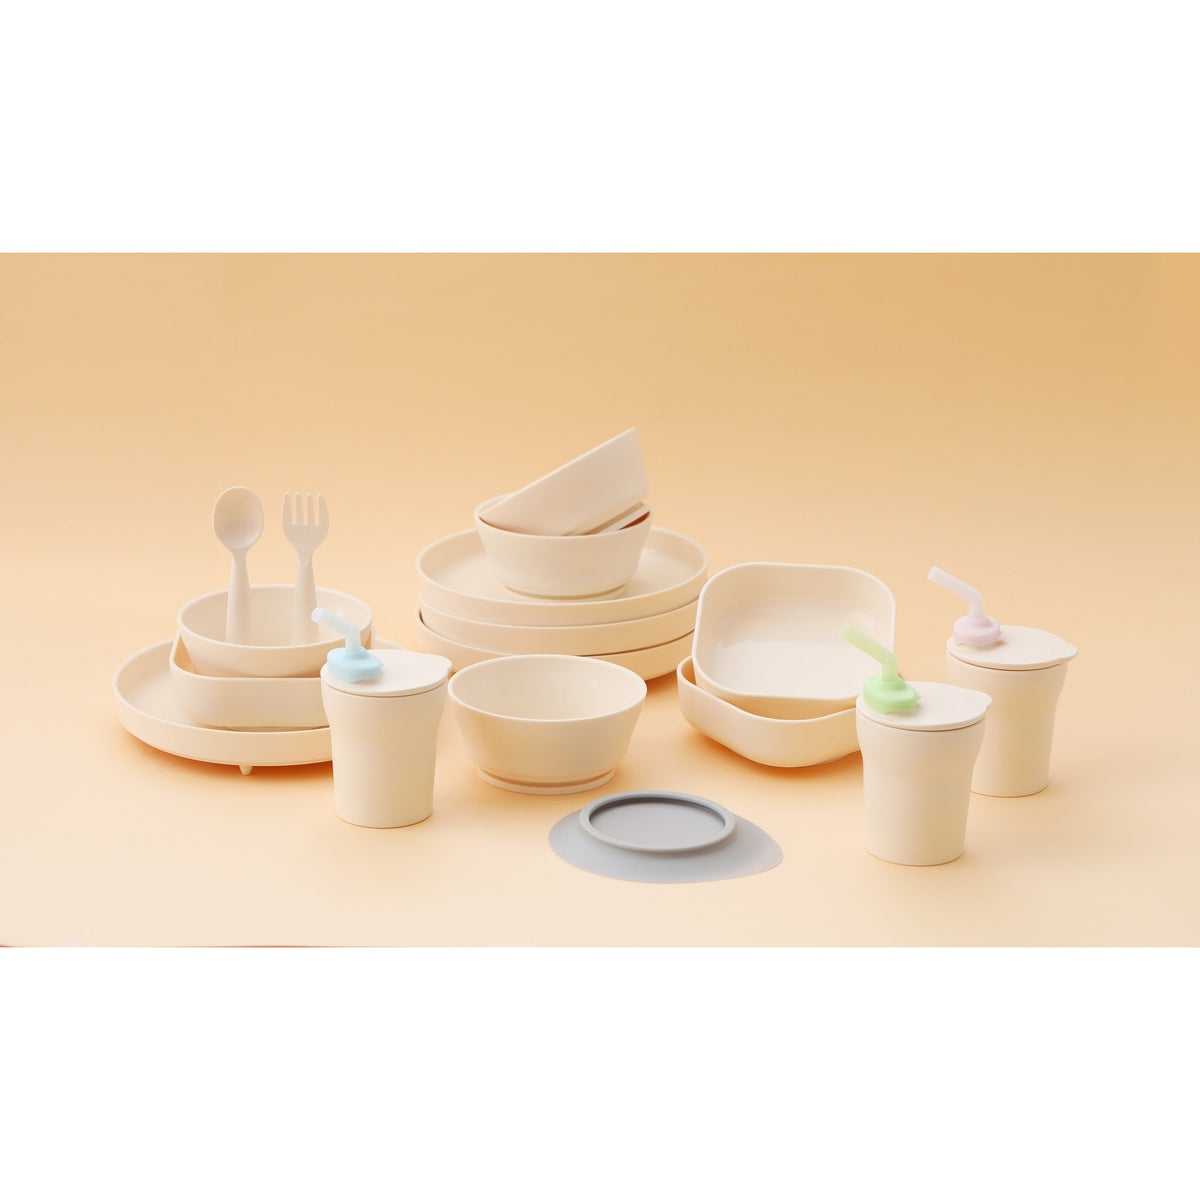 miniware-healthy-meal-set-pla-smart-divider-suction-plate-in-vanilla-+-silicone-divider-in-peach- (22)